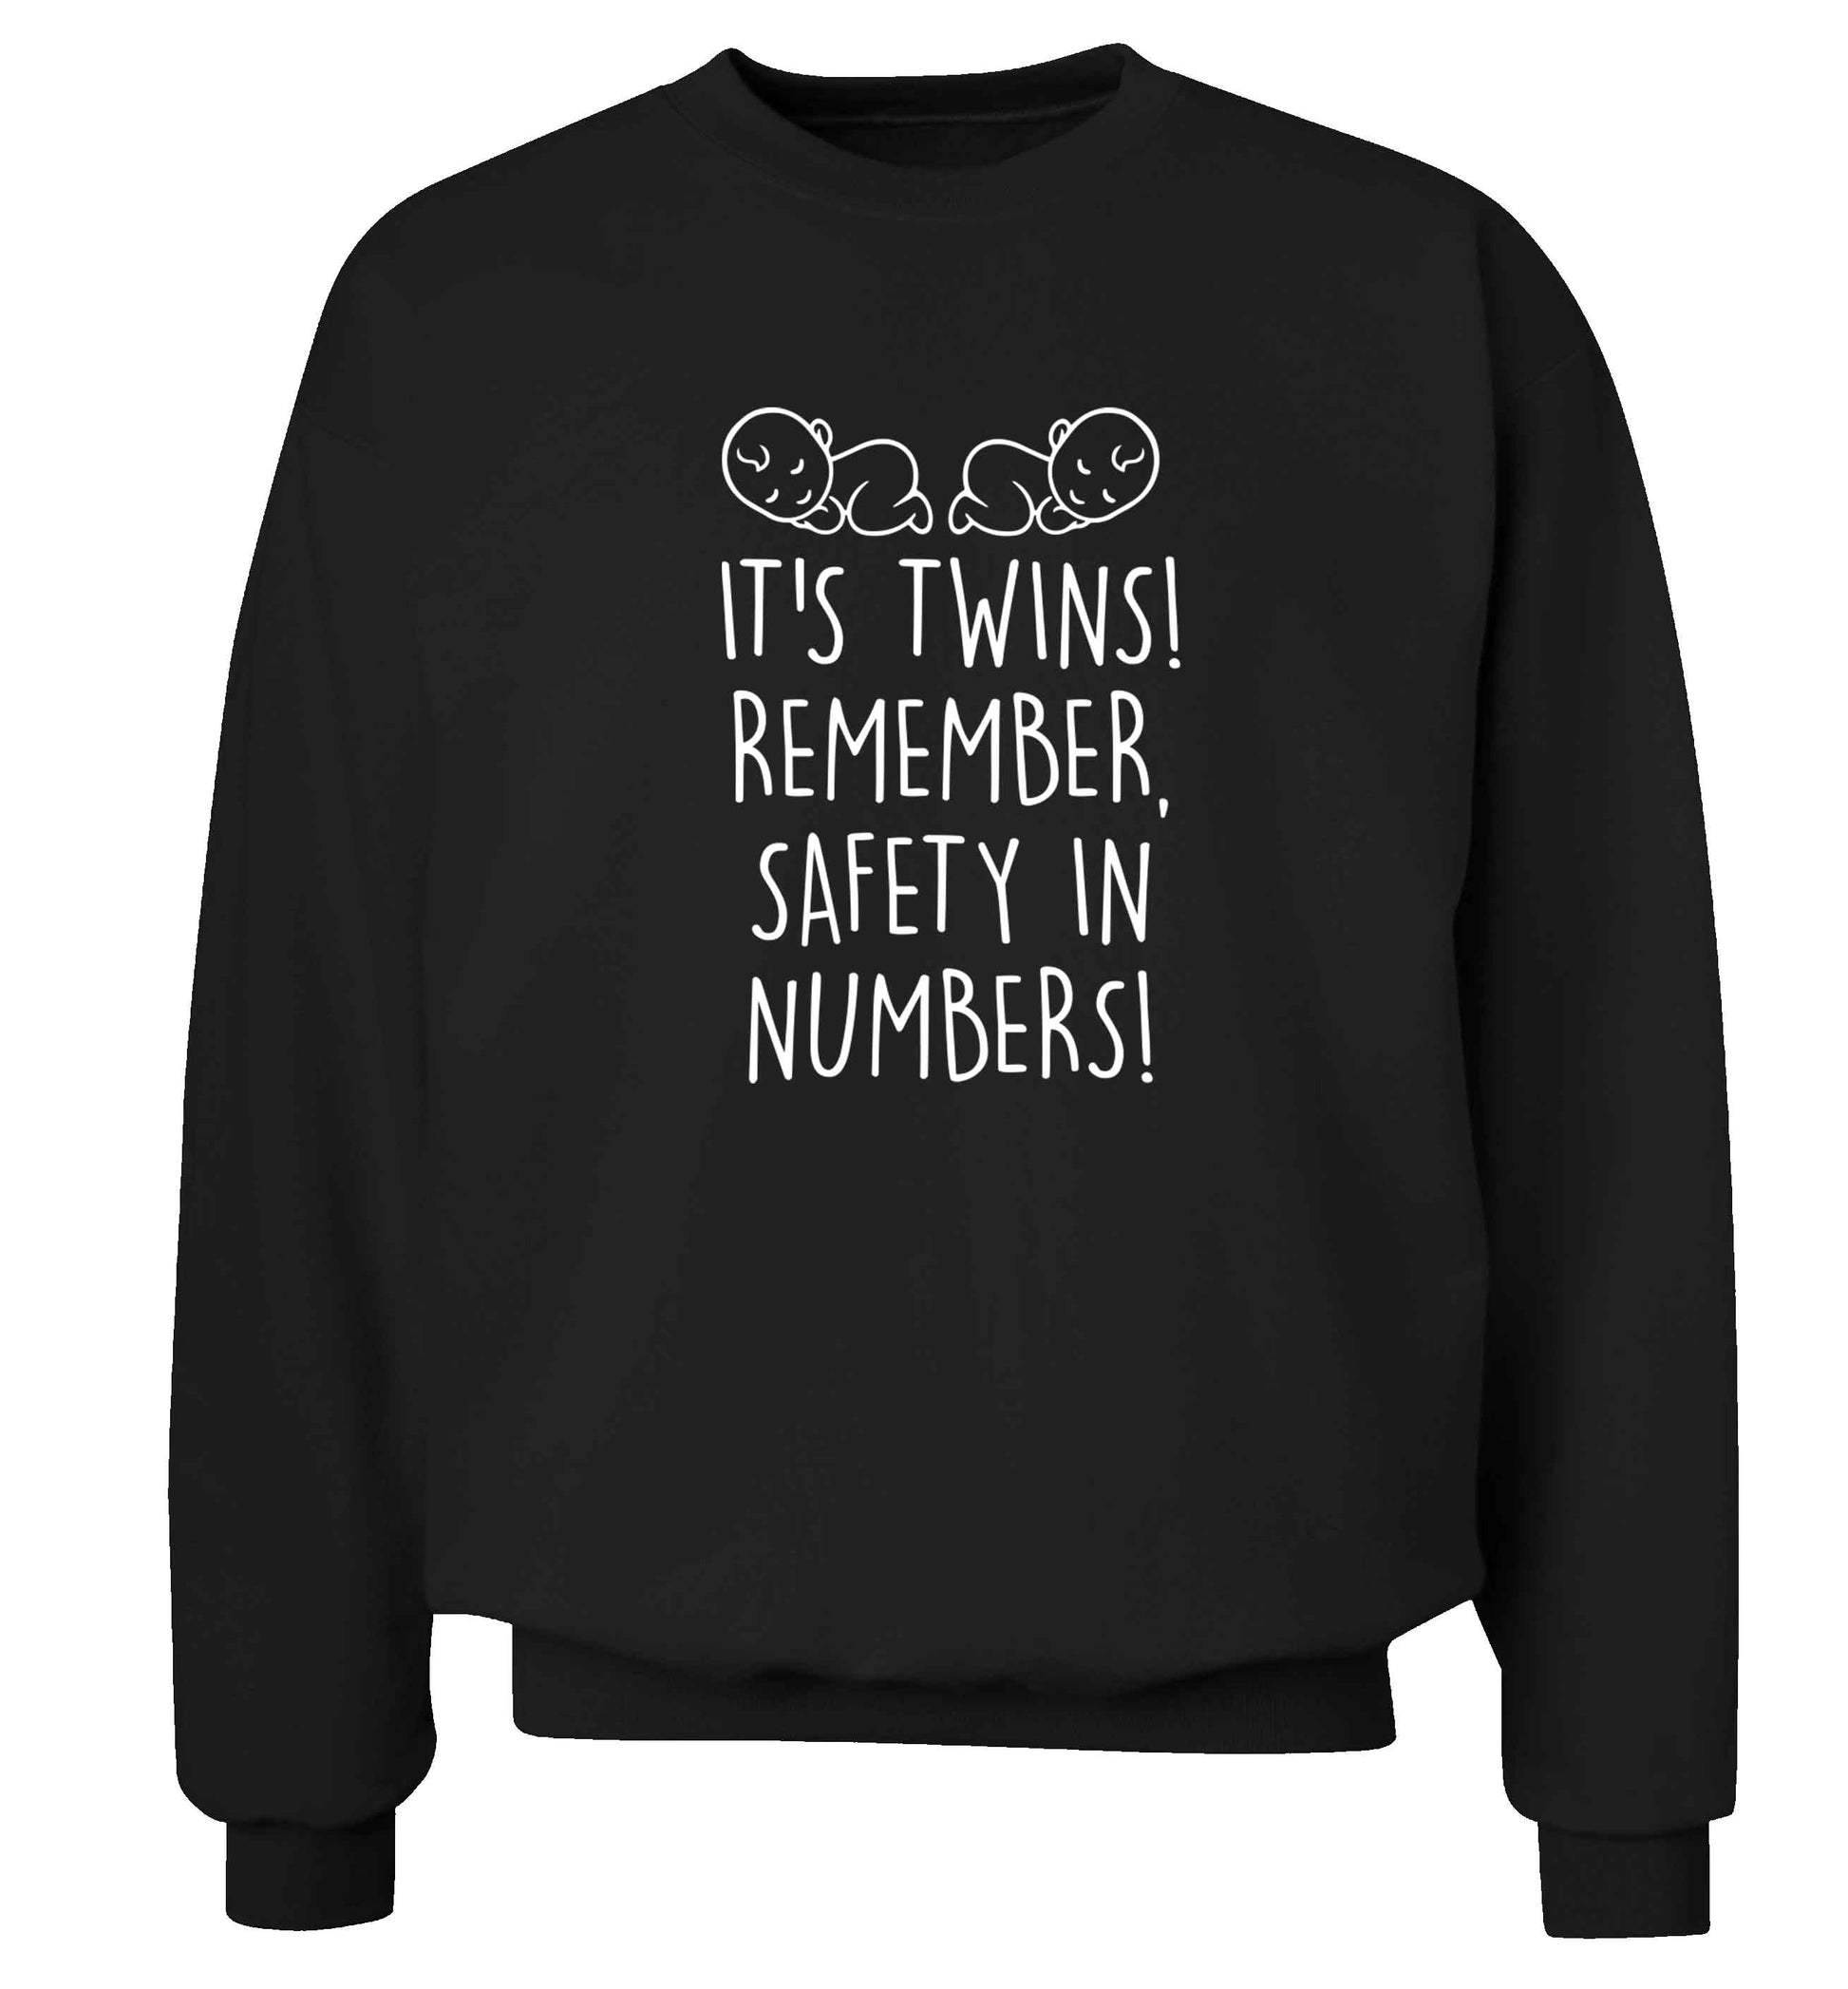 It's twins! Remember safety in numbers! adult's unisex black sweater 2XL